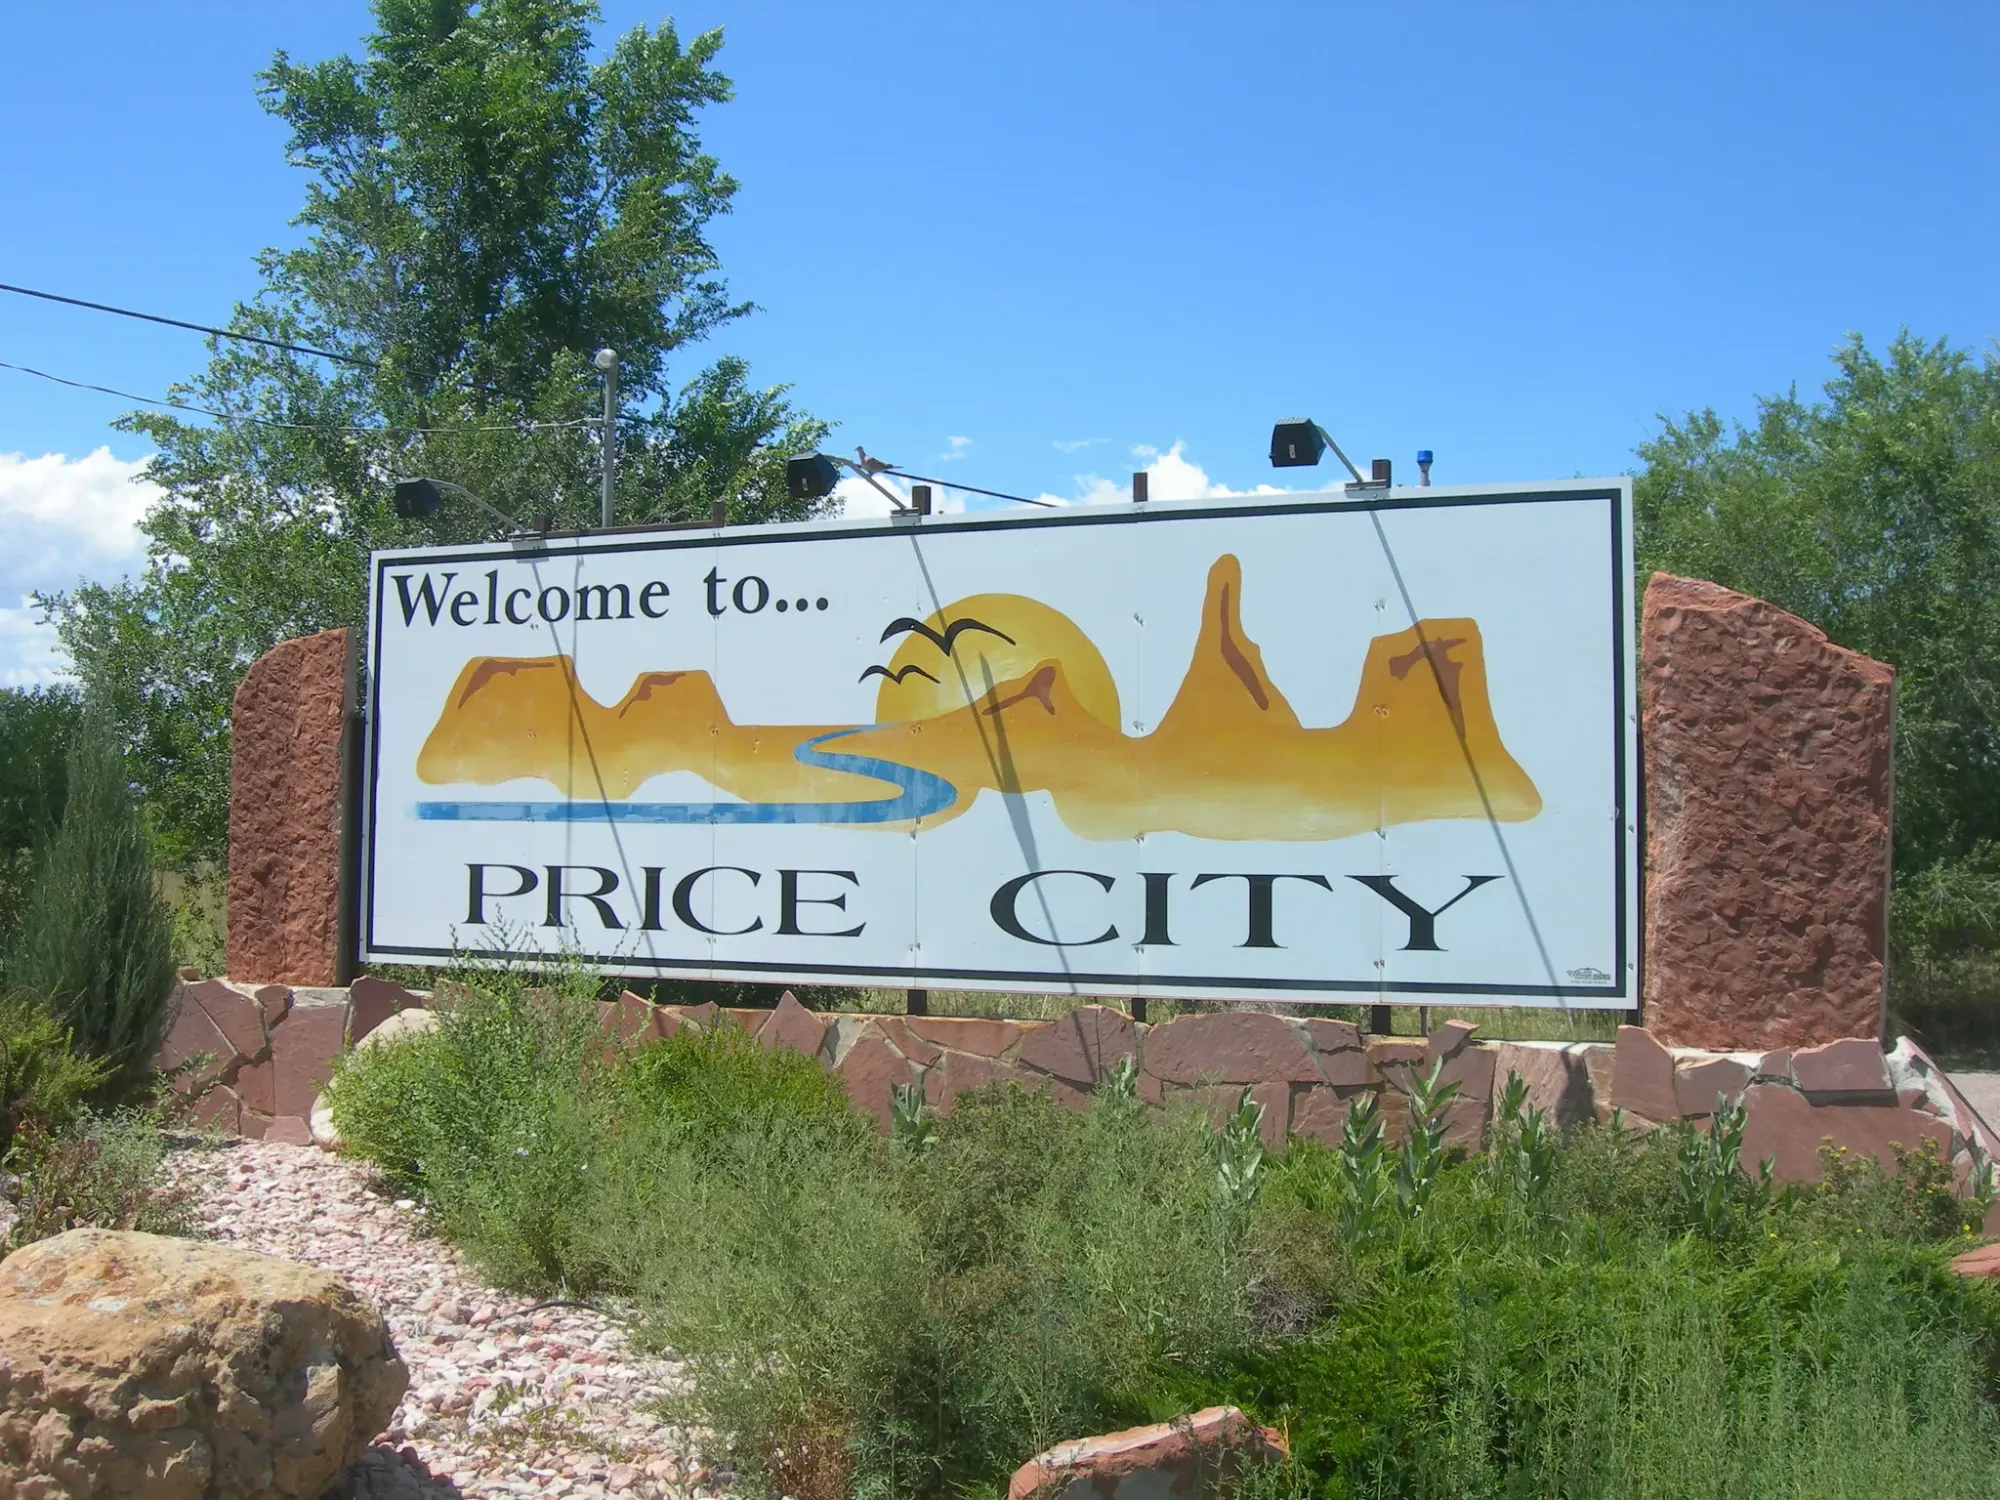 The welcome sign for the city of Price, UT (source: Jimmy Emerson, DVM)